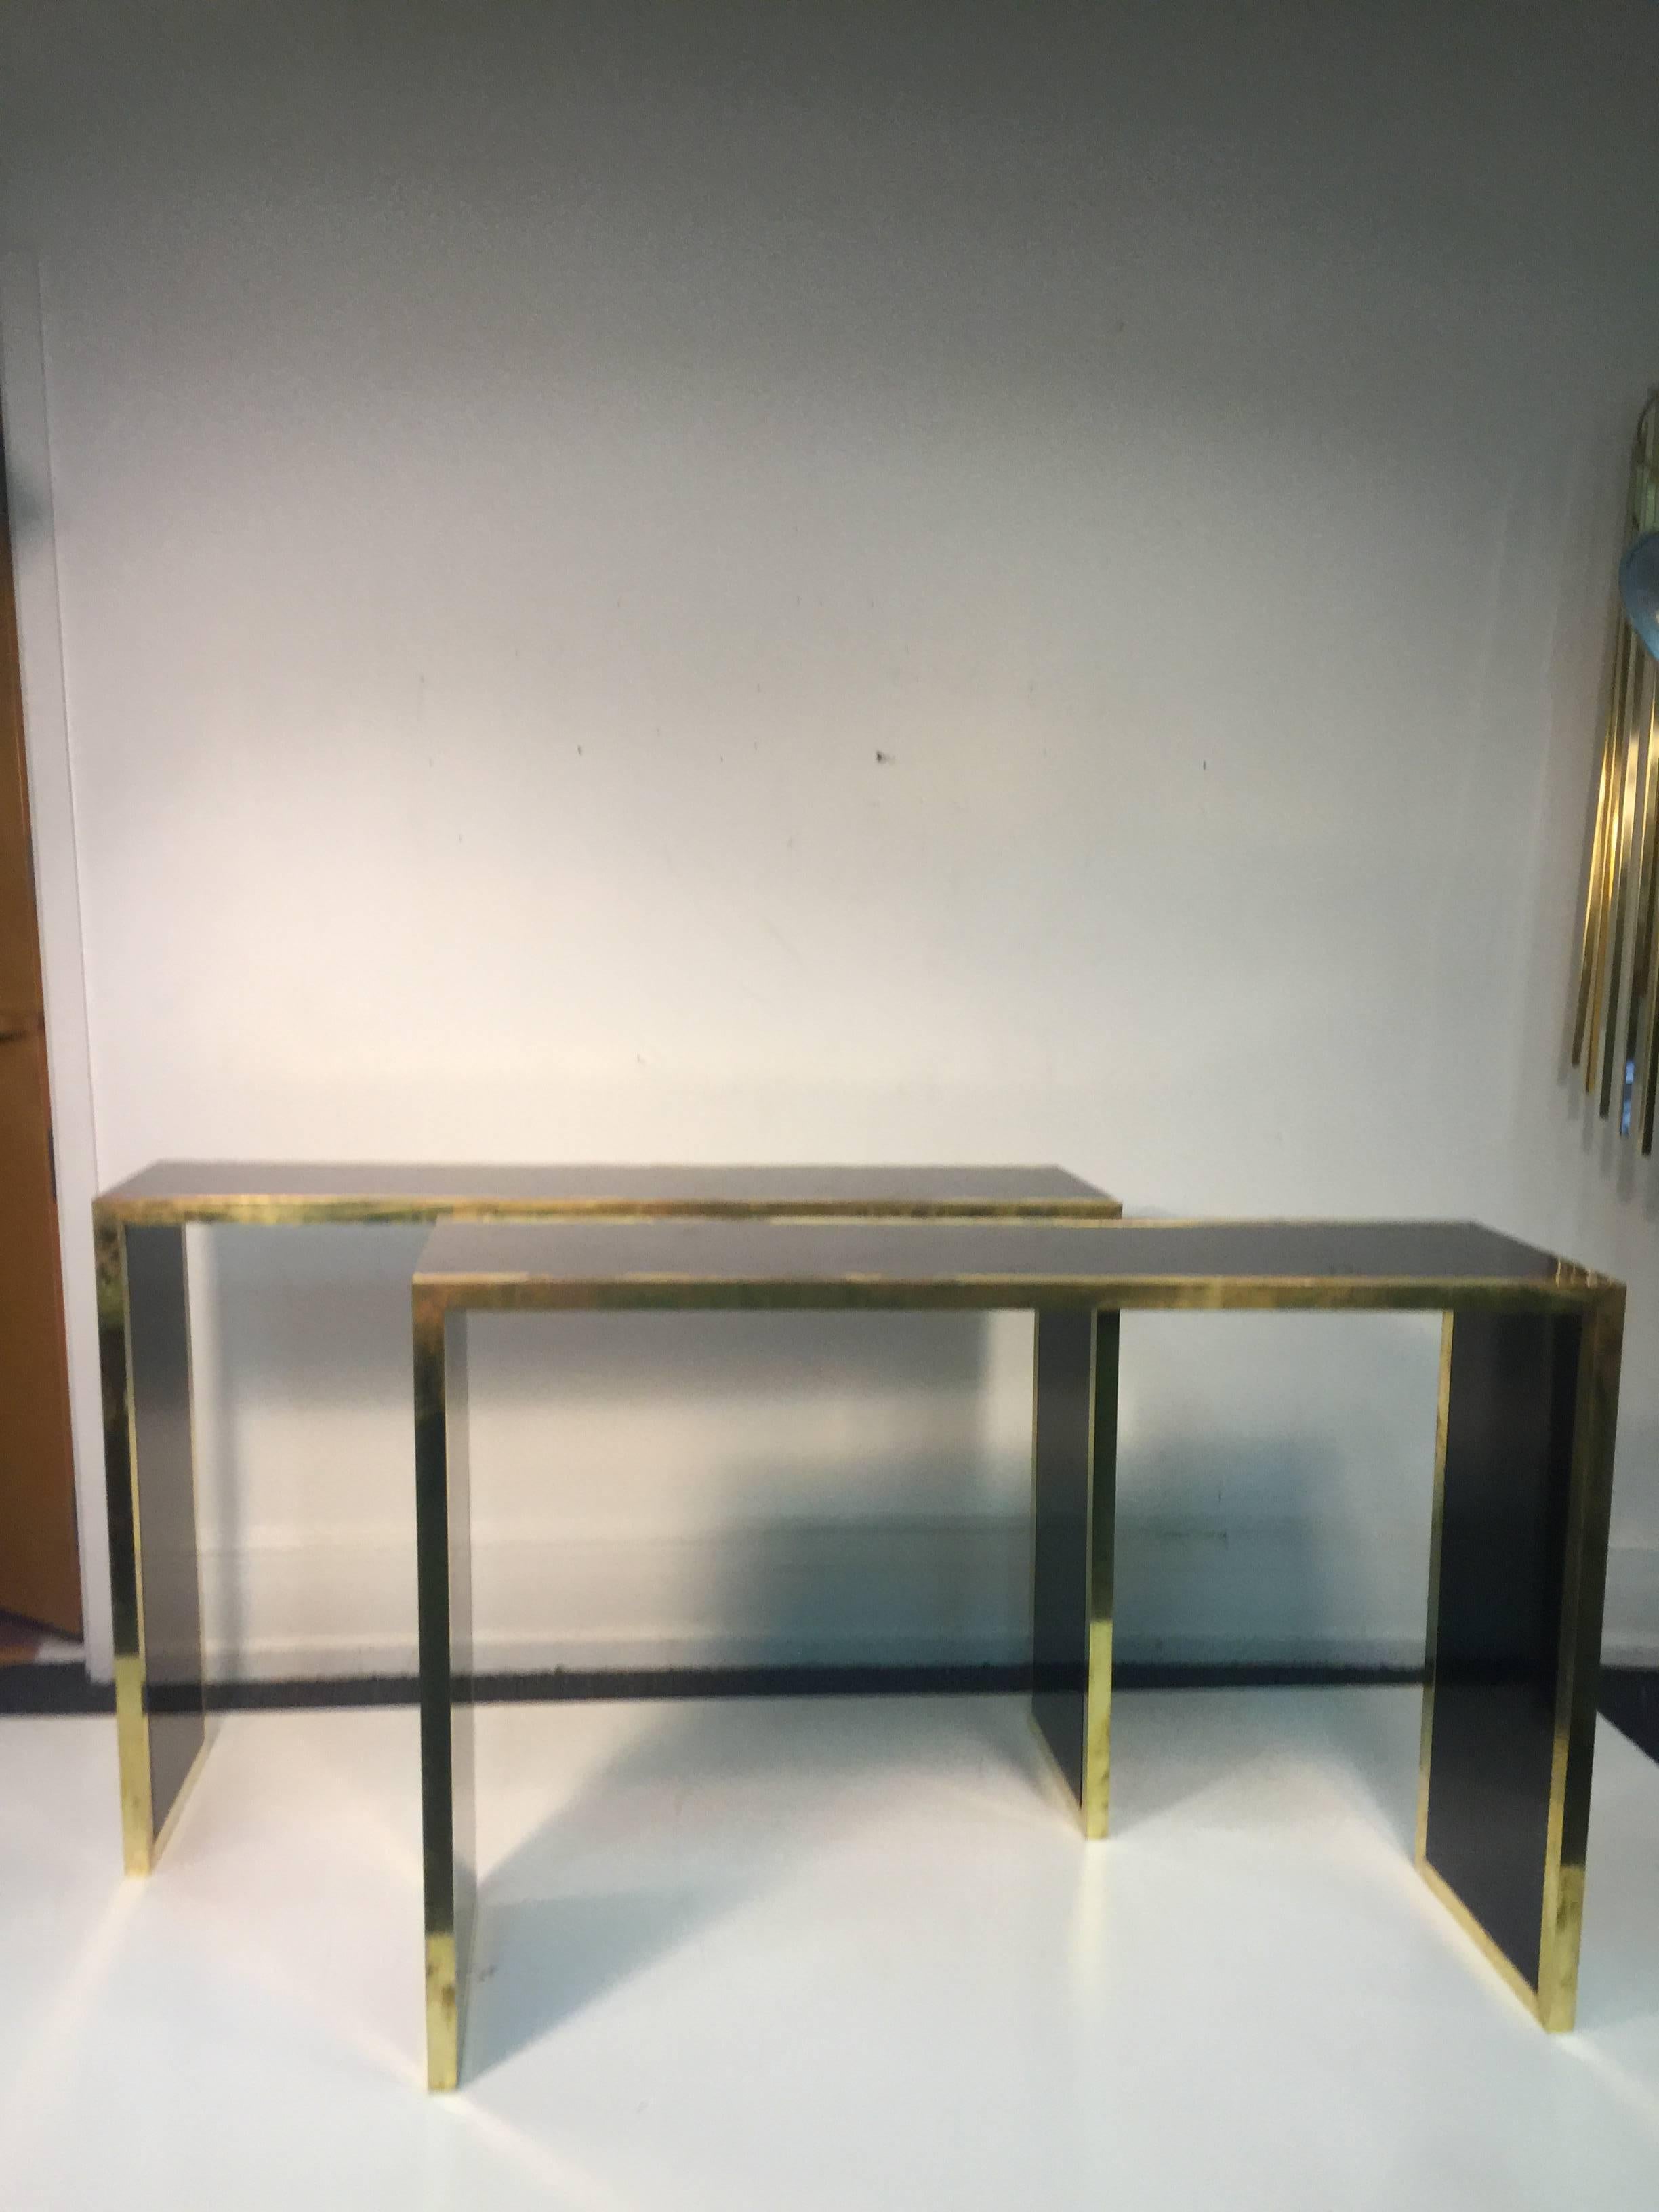 An elegant pair of Alain Delon style black lacquer and brass French console tables, circa 1970. Good condition with age appropriate wear.